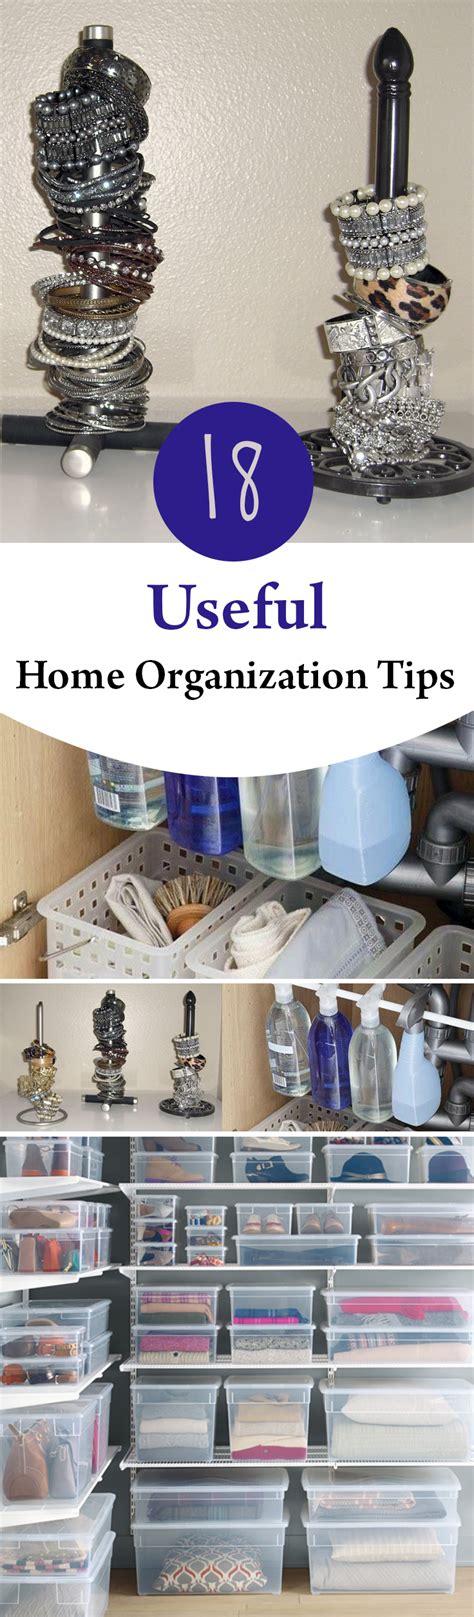 18 Useful Home Organization Tips Wrapped In Rust